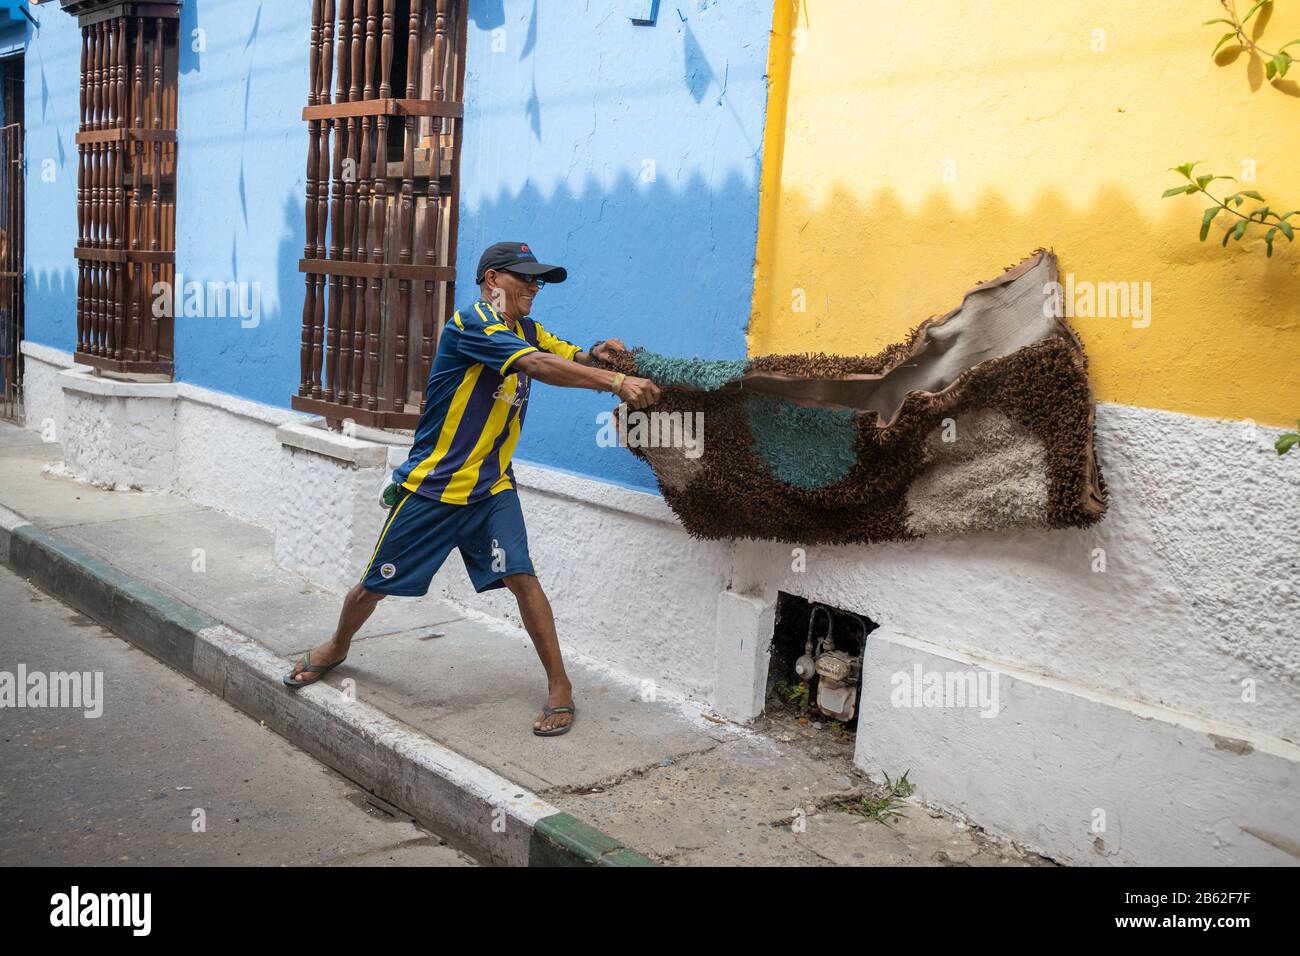 Life goes on in this busy tourist area in Getsemani, man cleaning the dust from a rug. Stock Photo